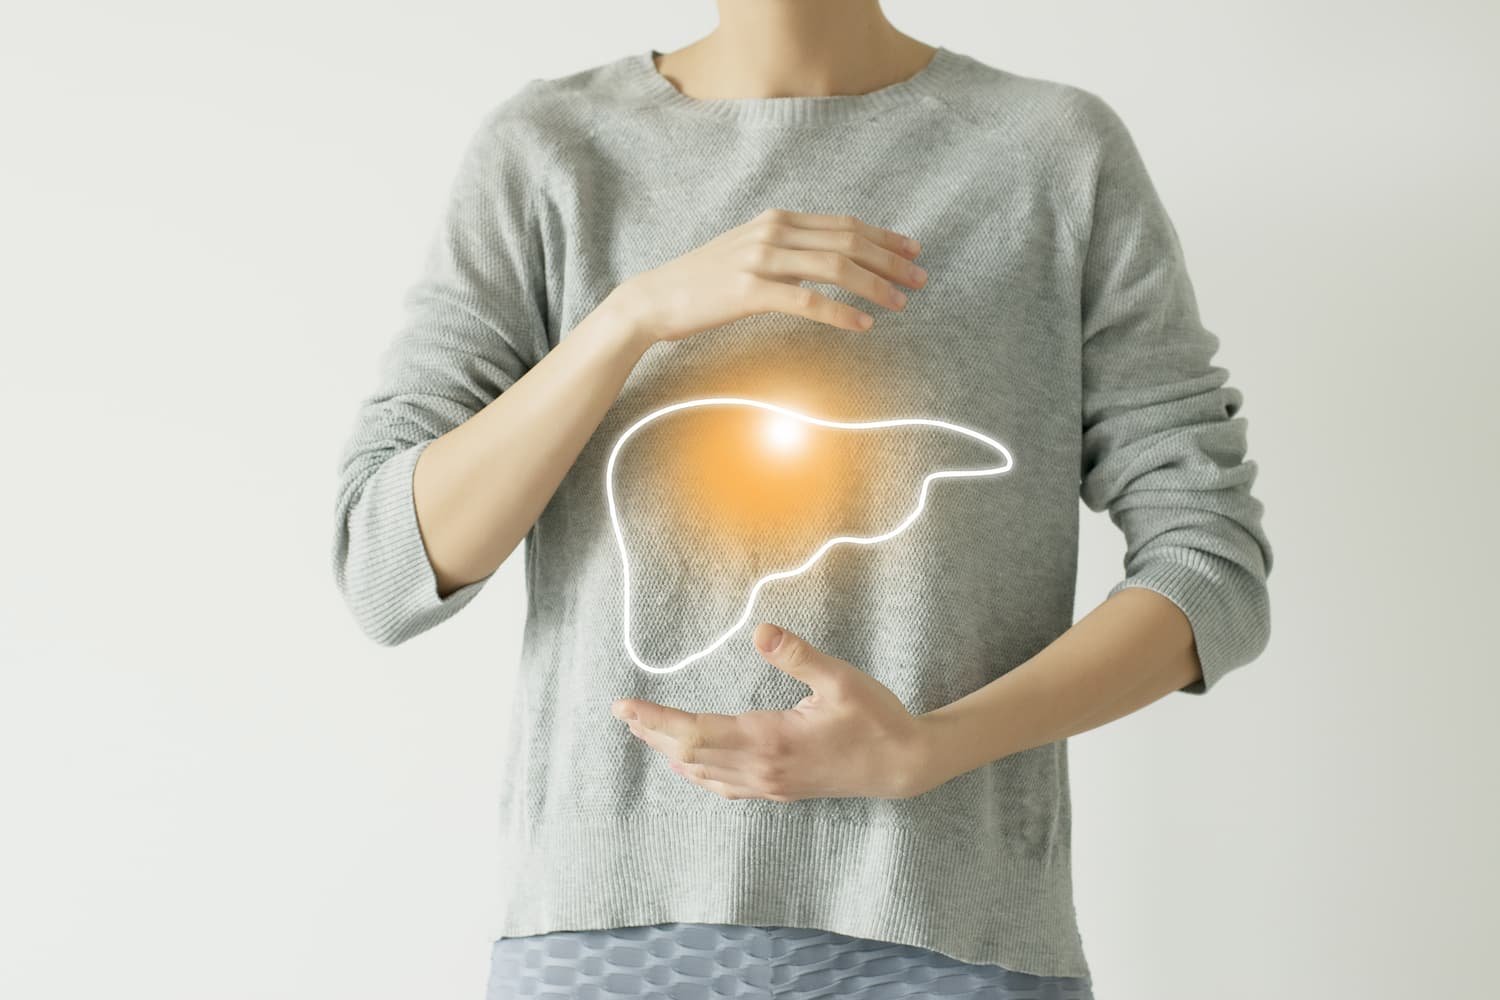 An outline of a woman's liver to highlight where it resides in the body